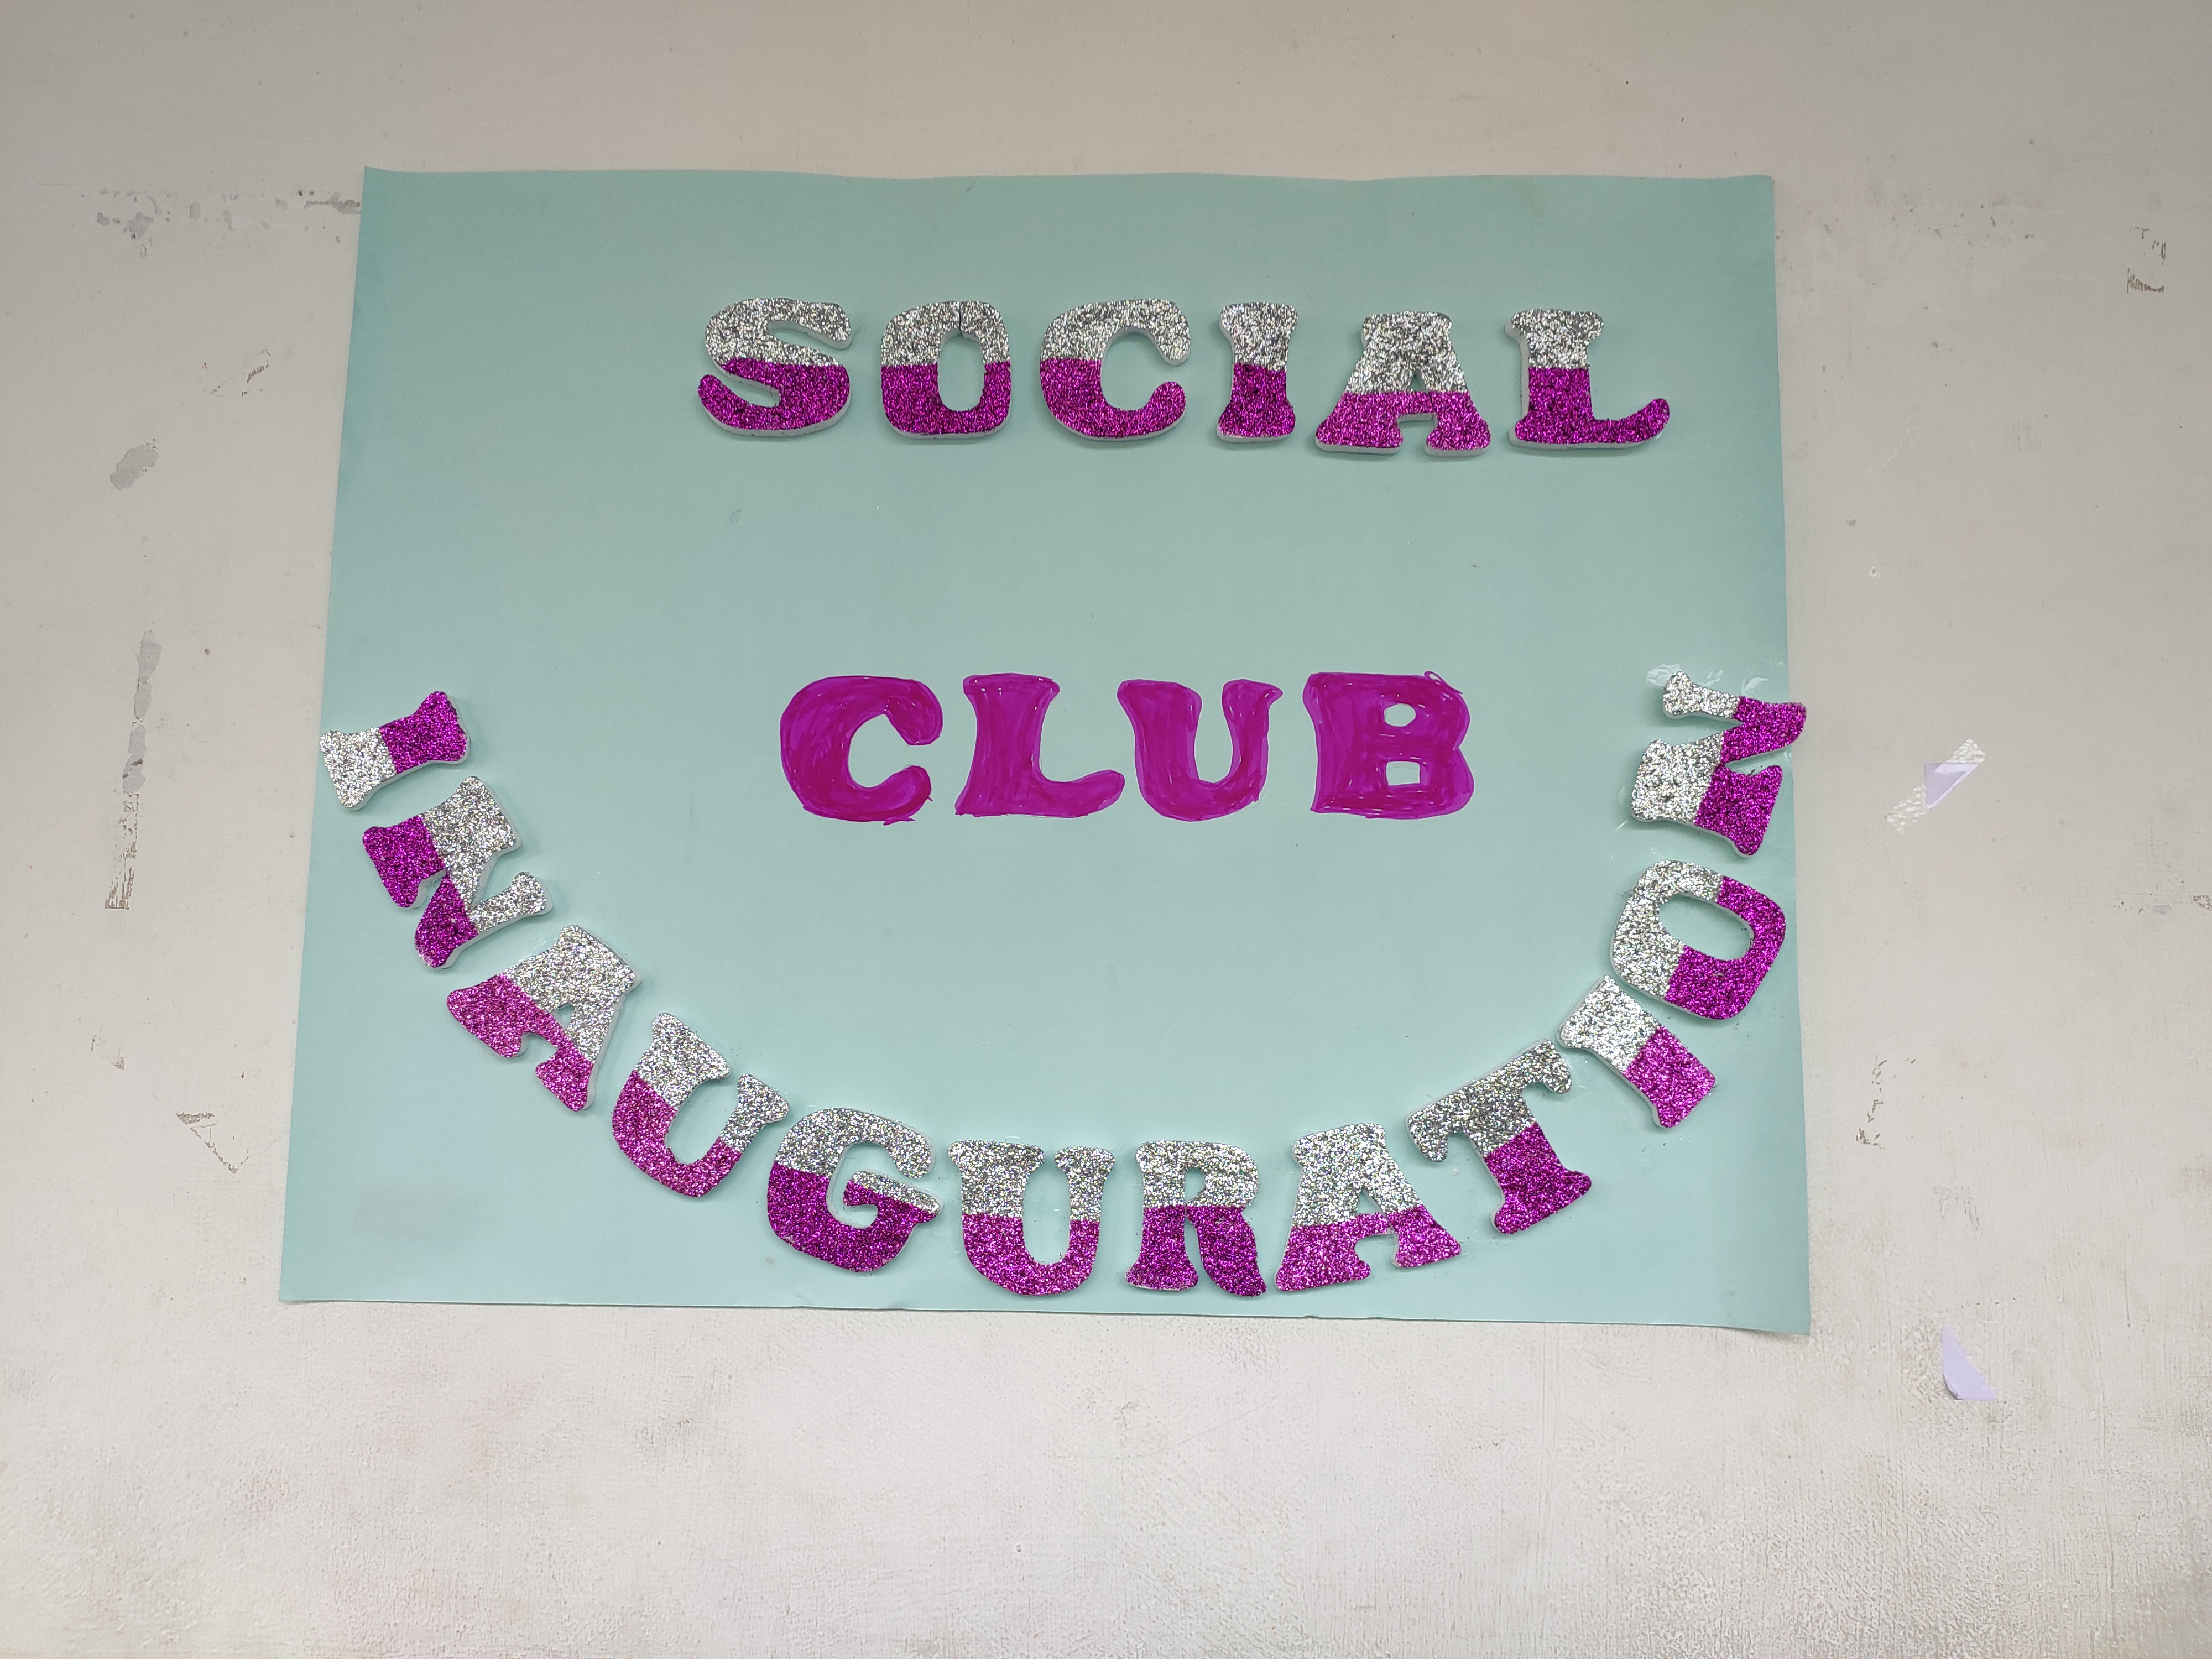 The Social Club is responsible for ensuring that students experience the society that exists outside of their classroom. They are also integral to the welfare of students and if anyone has a personal, medical or travel problem they can call or come in and see the Social Club for help.